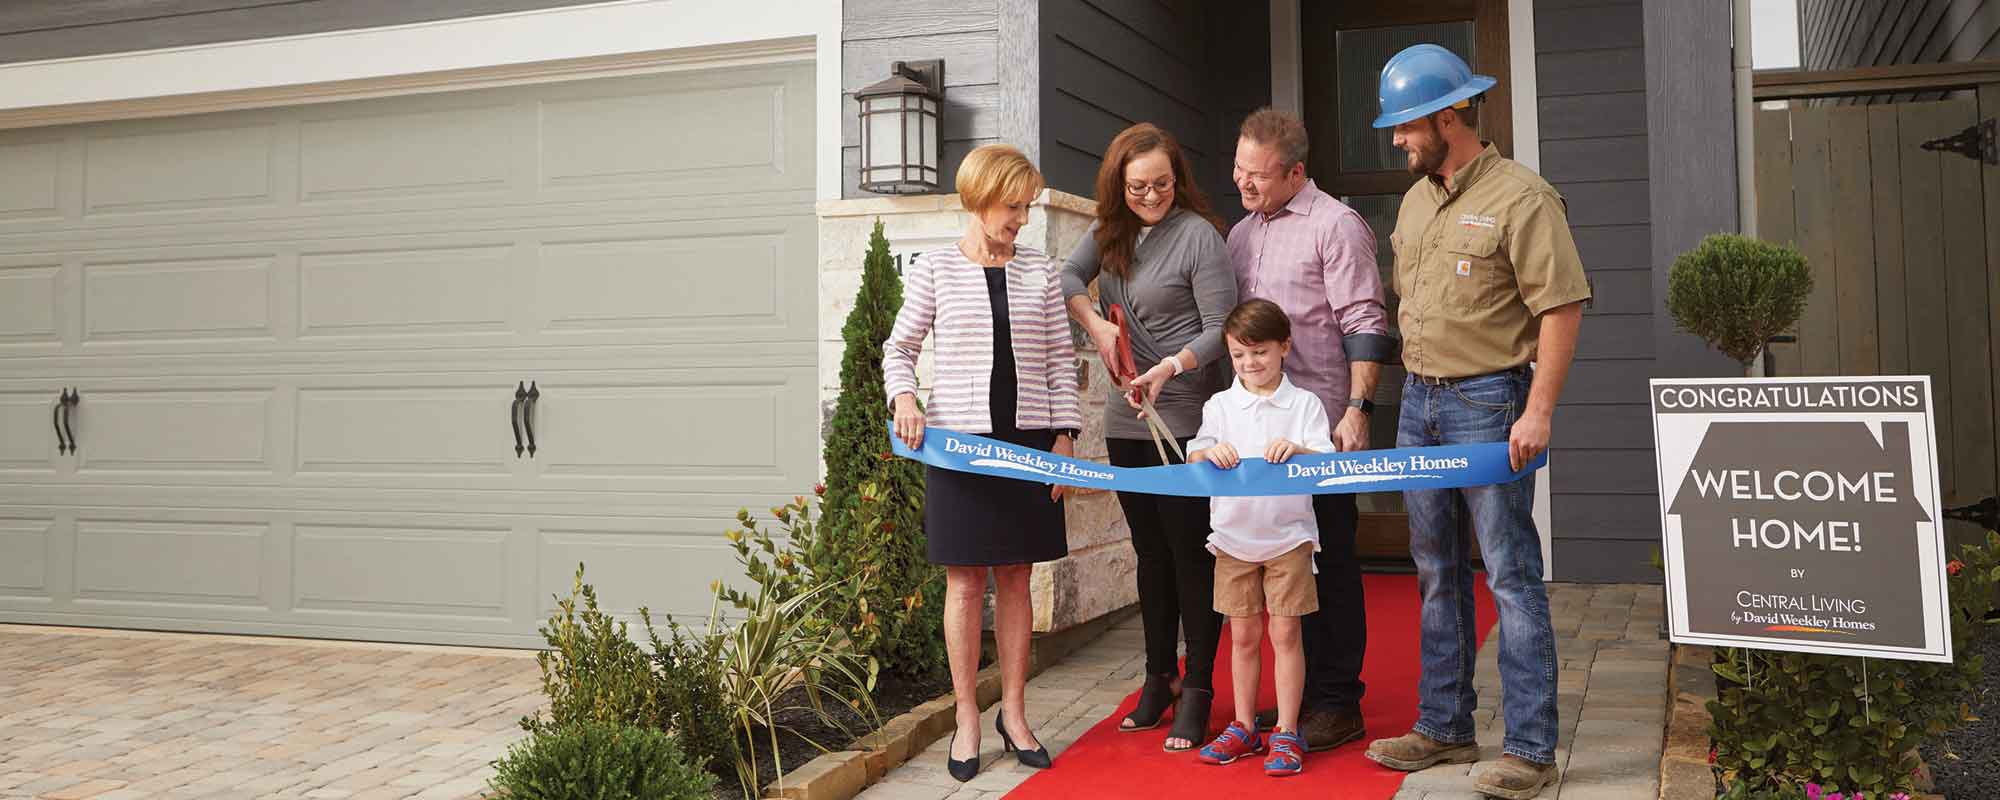 A David Weekley Homes Sales Consultant and Personal Builder welcoming a family to their new home